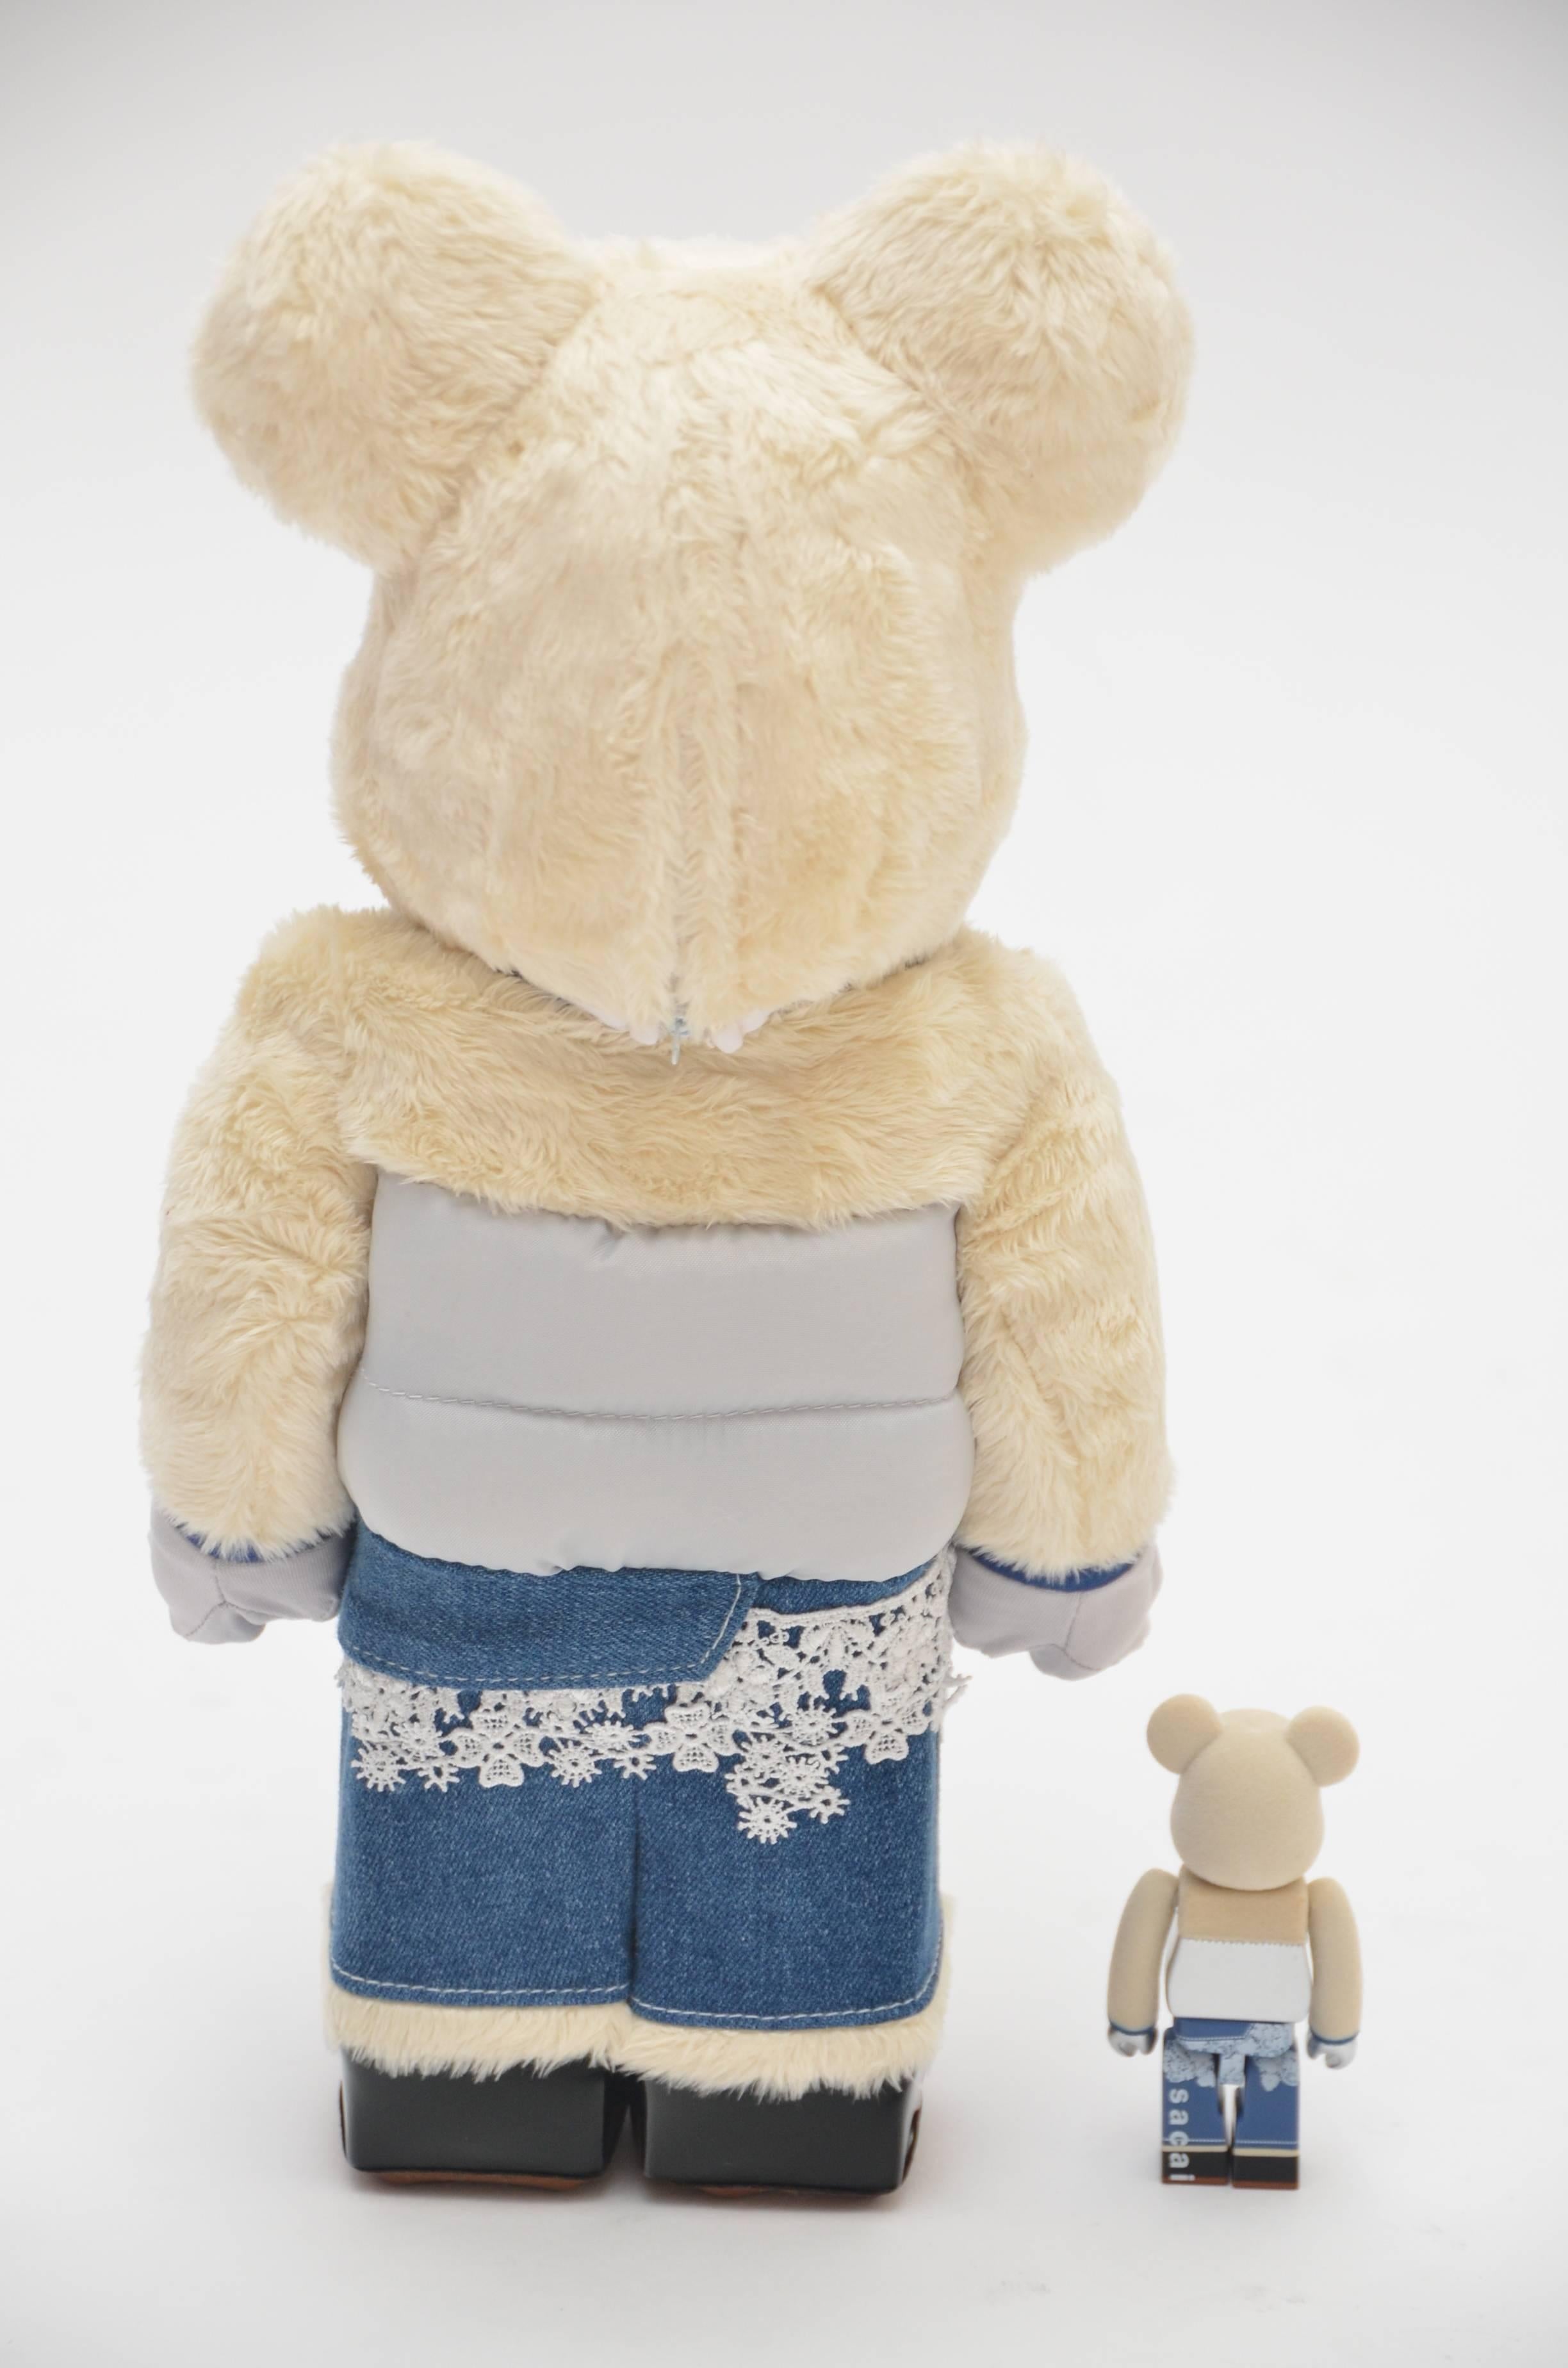 SACAI 2017 Rinway MEDICOM BE@RBRICK 400% AND 100% SET New

Exclusive colaboration between Colette Paris -Sacai -Be@rbrick Medicom Toys.
Limited edition be@rbrick is wearing a women jacket and a denim skirt from Sacai 17 AW runaway . 
The jacket and